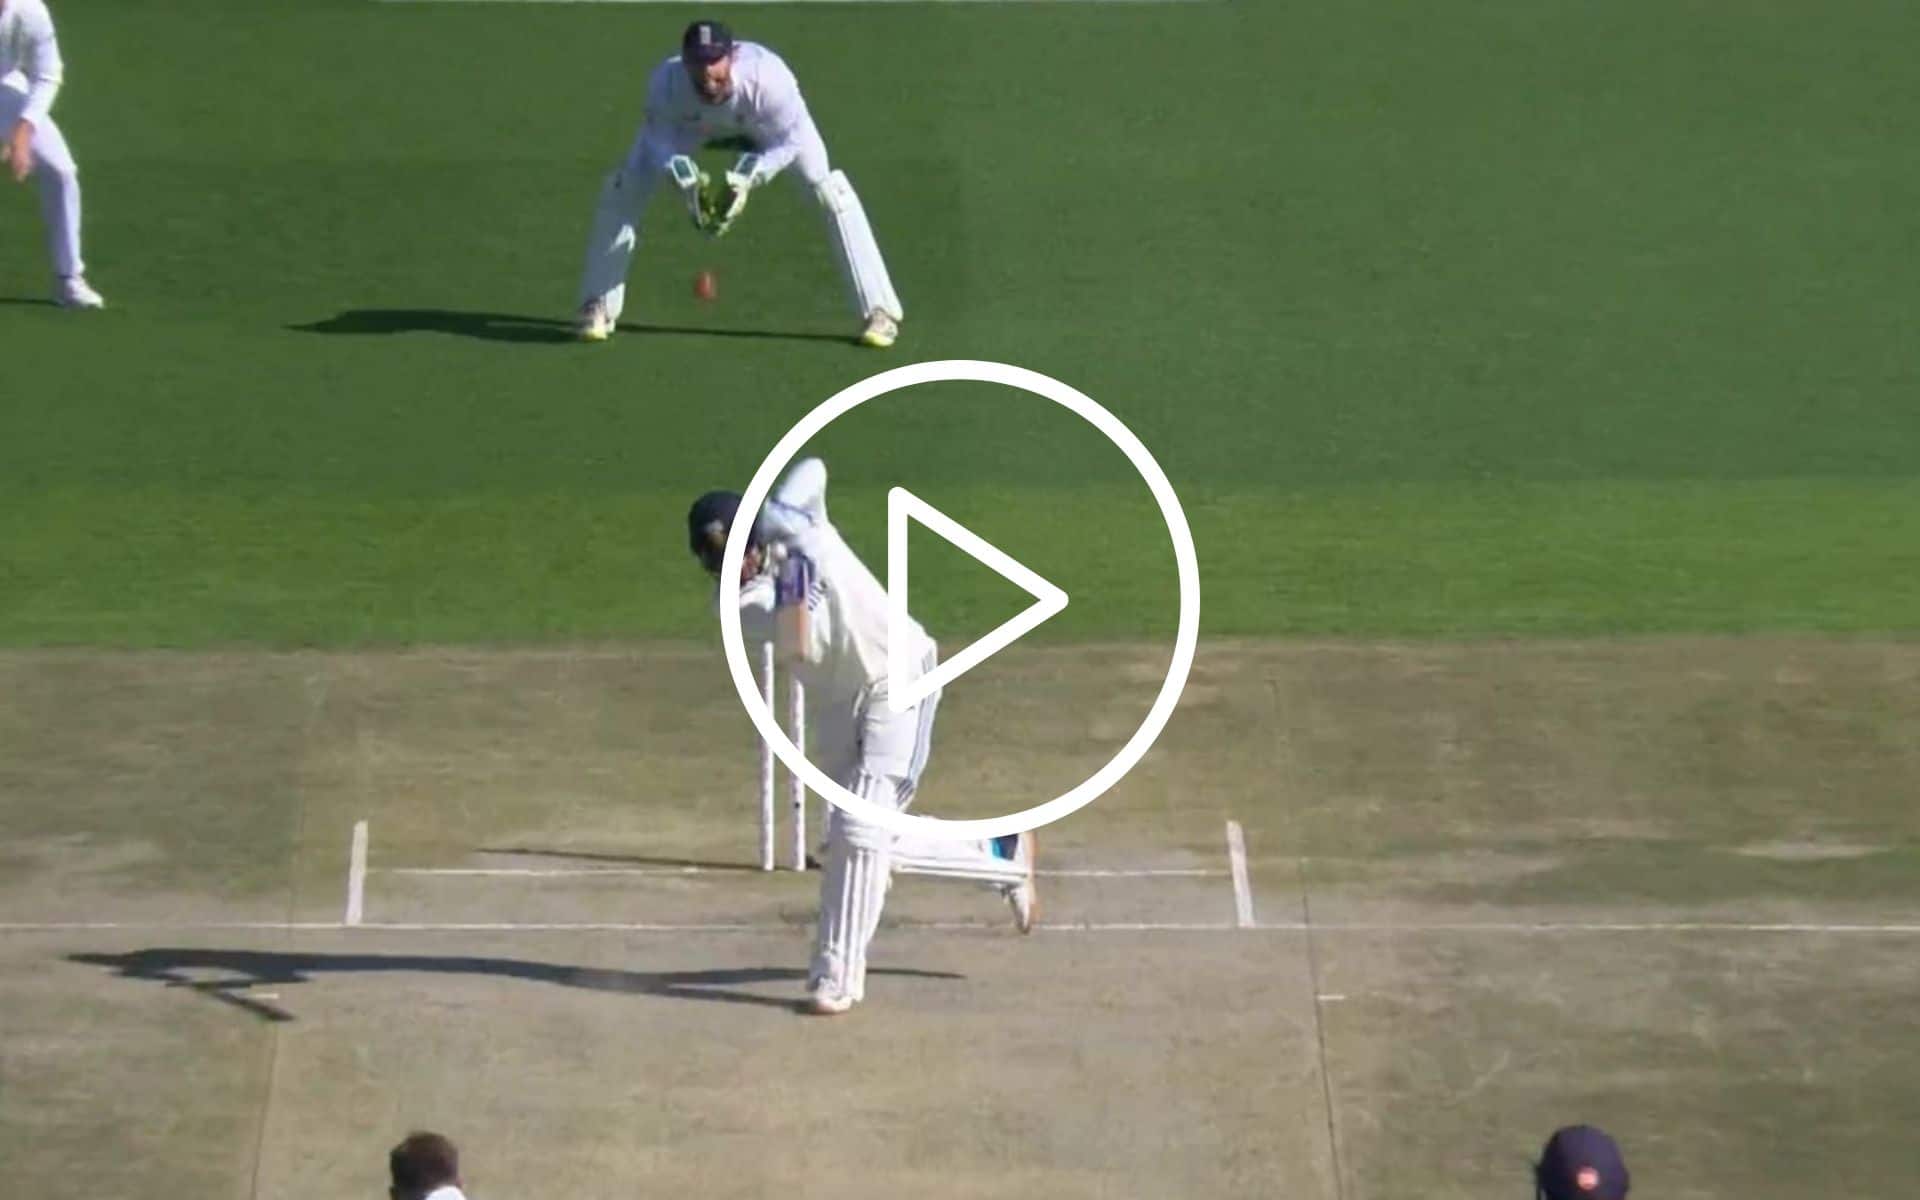 [Watch] Shubman Gill Launches James Anderson for A 'Jaw-Dropping' Six in IND vs ENG 5th Test